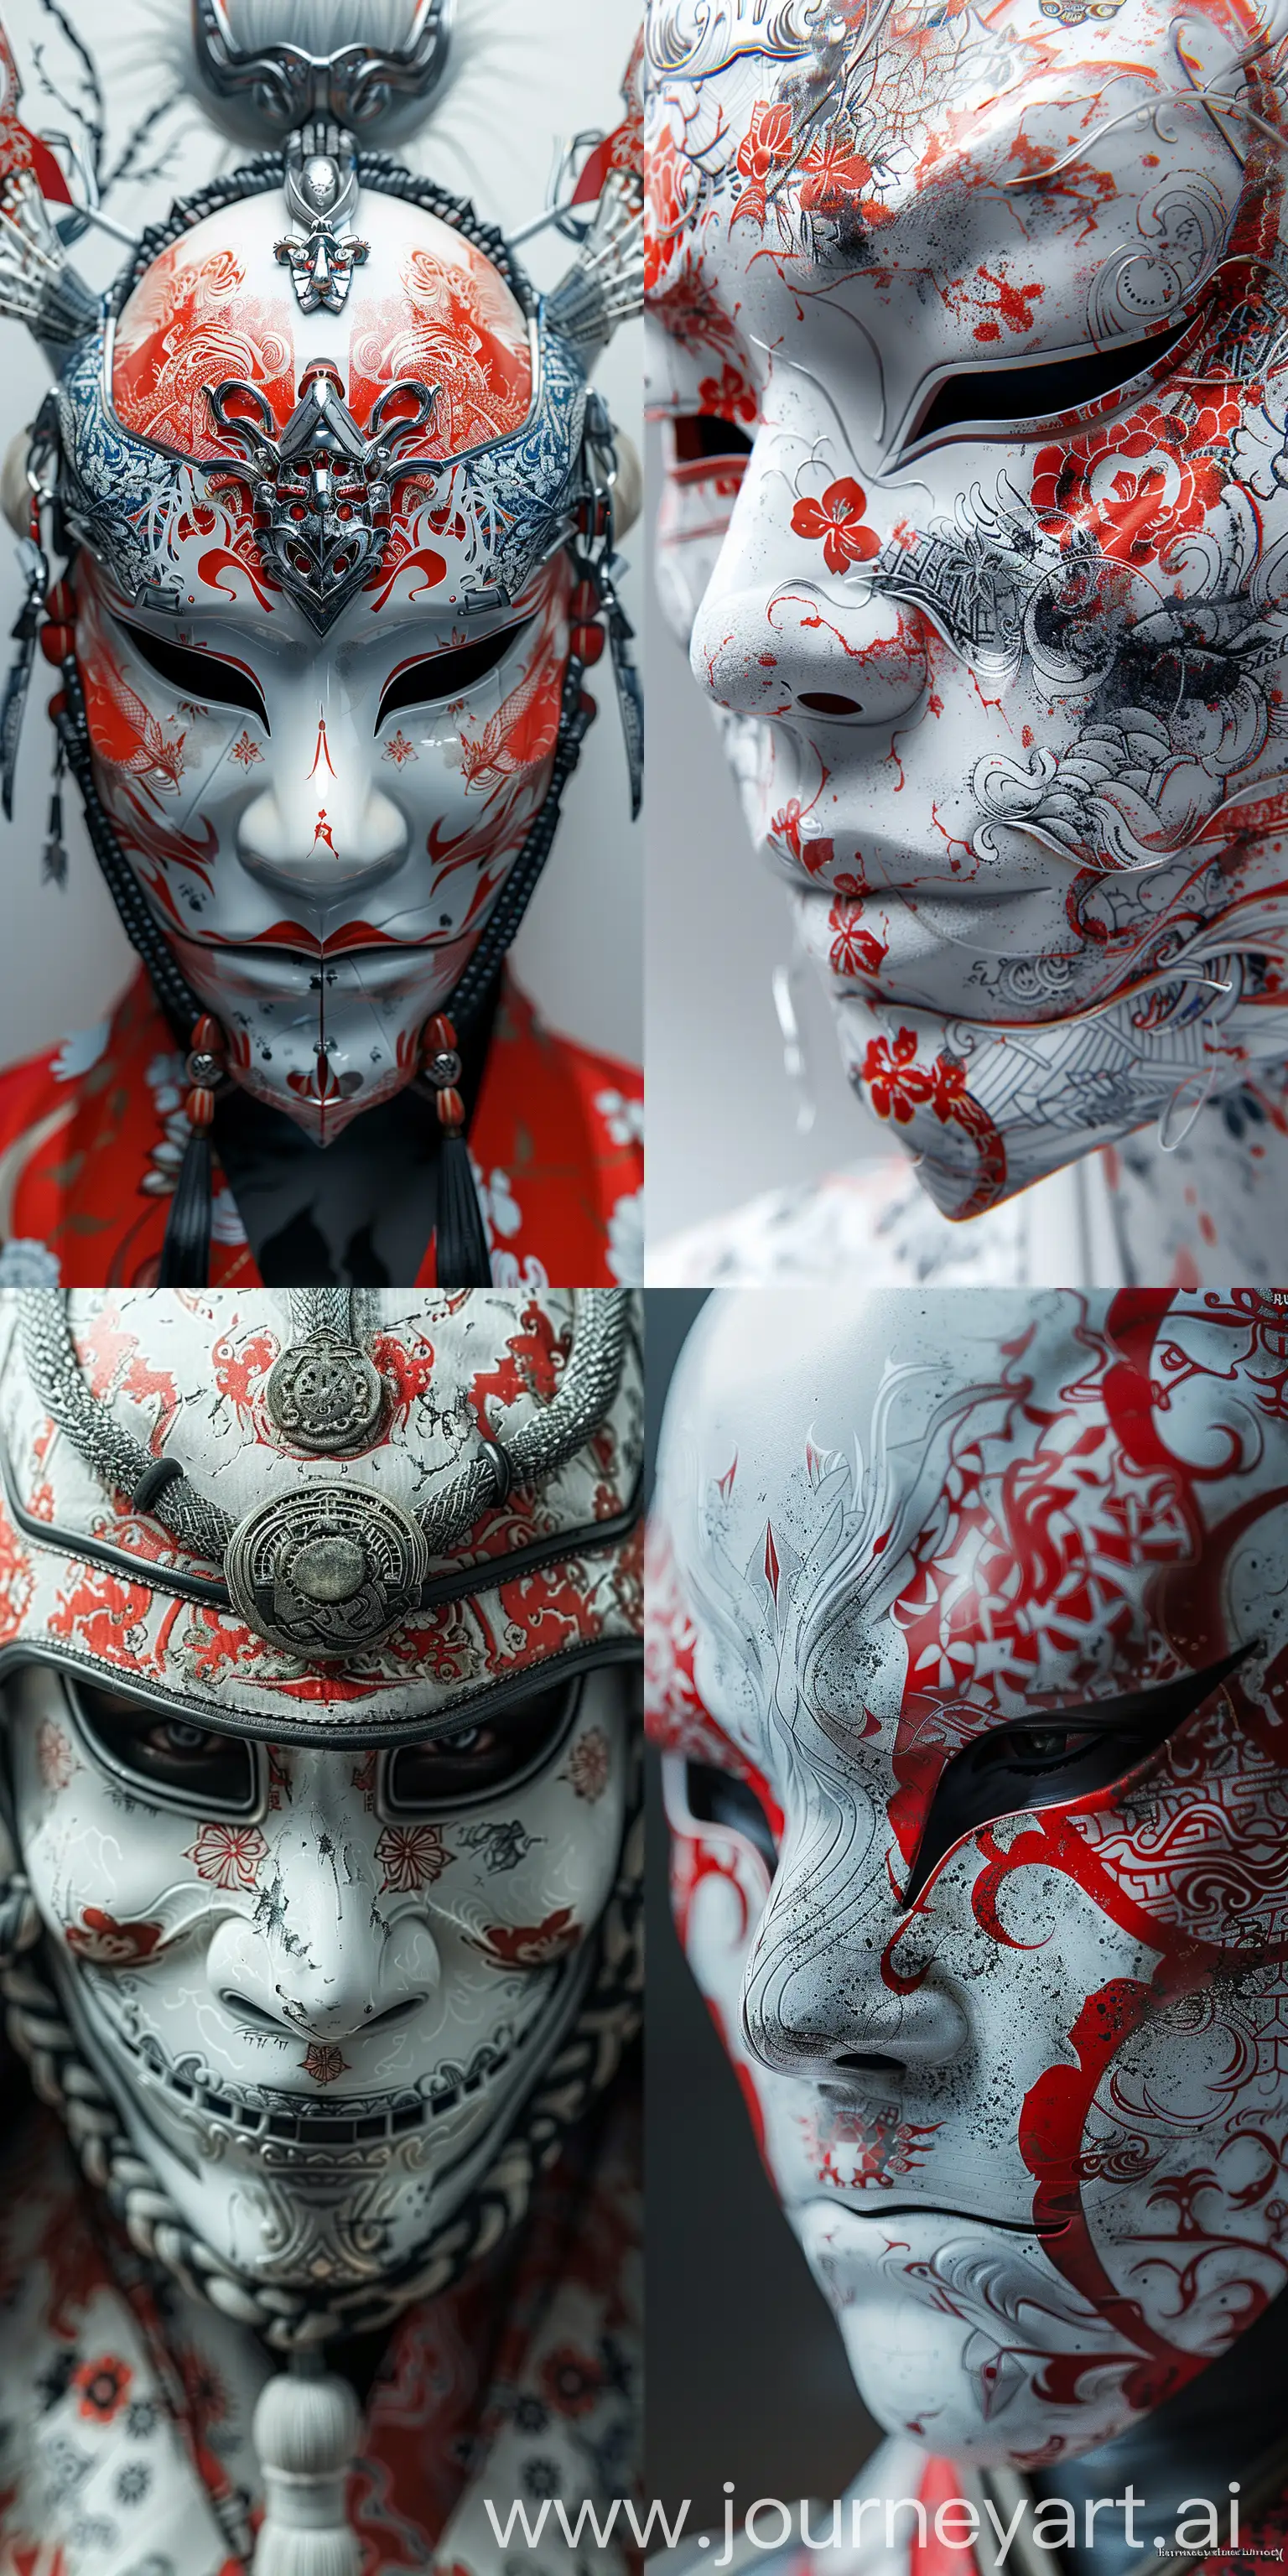 Closeup-Photo-of-SamuraiStyle-Mask-with-Red-and-White-Patterns-on-Pure-White-Background